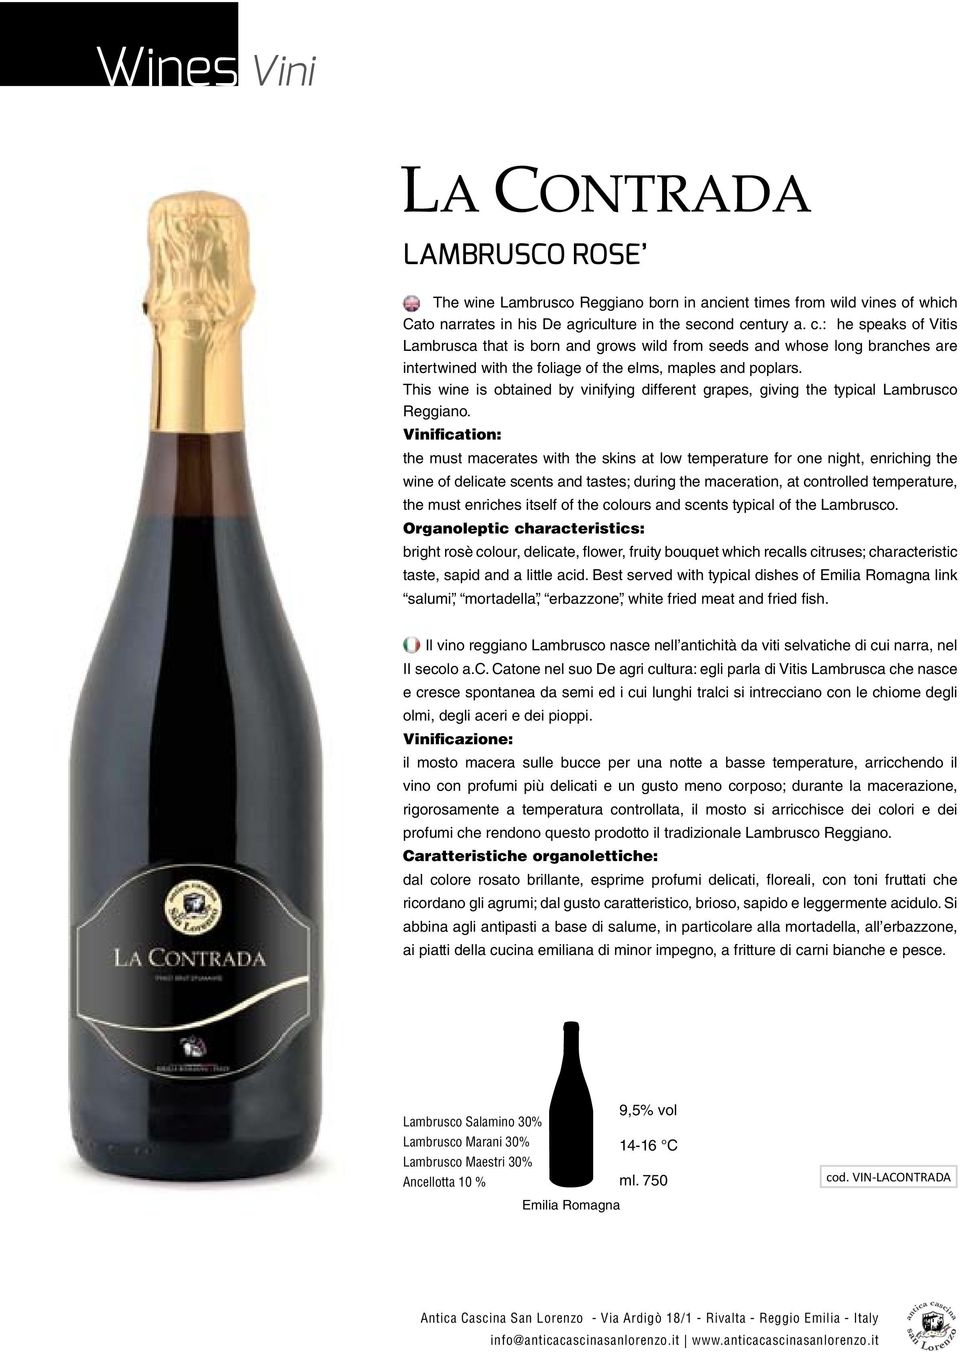 This wine is obtained by vinifying different grapes, giving the typical Lambrusco Reggiano.